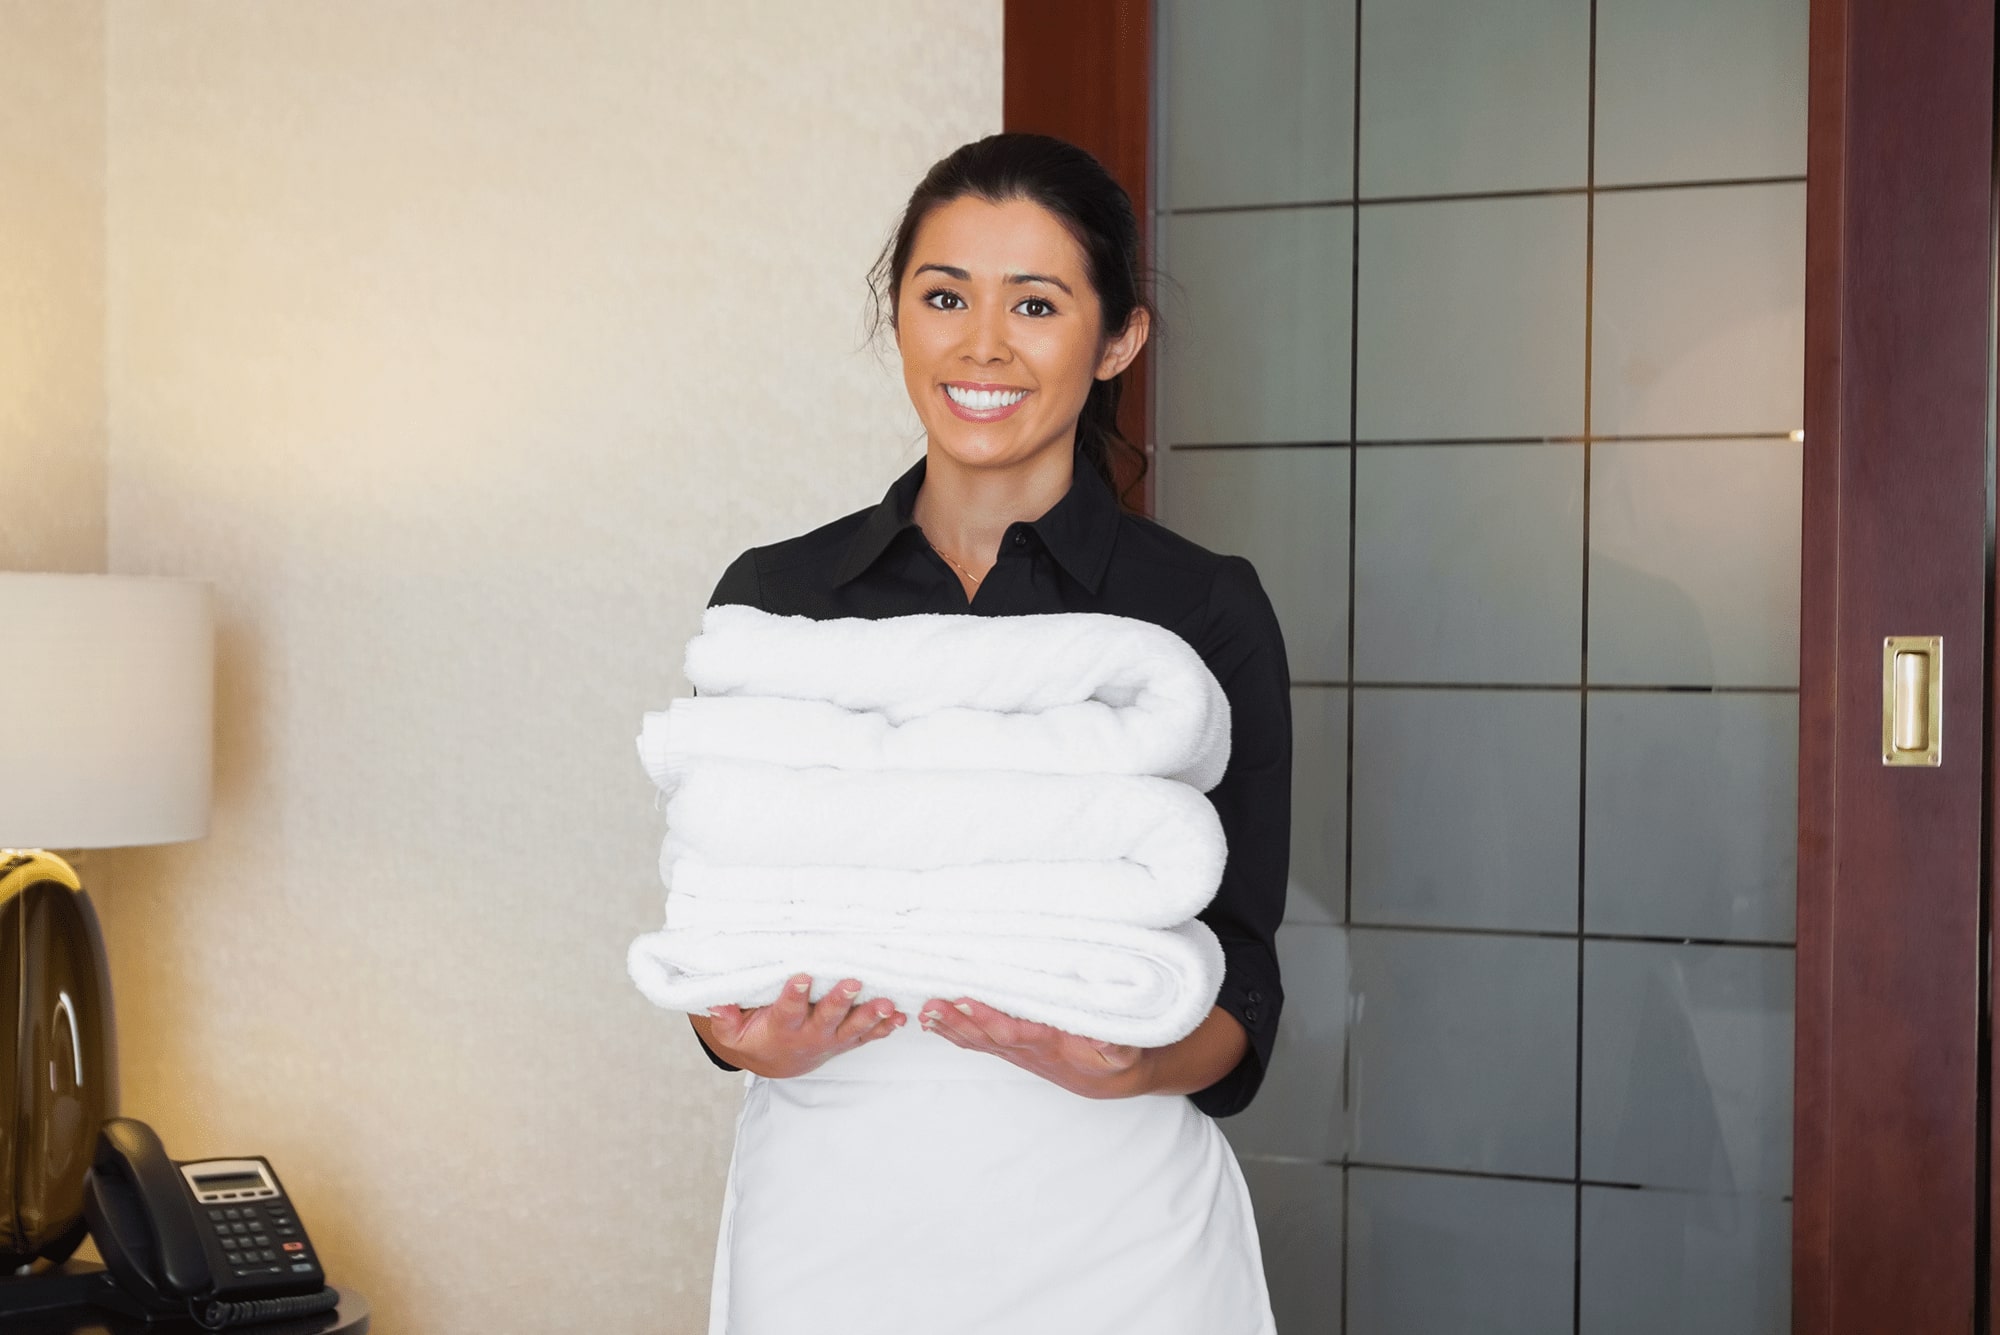 A woman holding towels while working in a hotel.